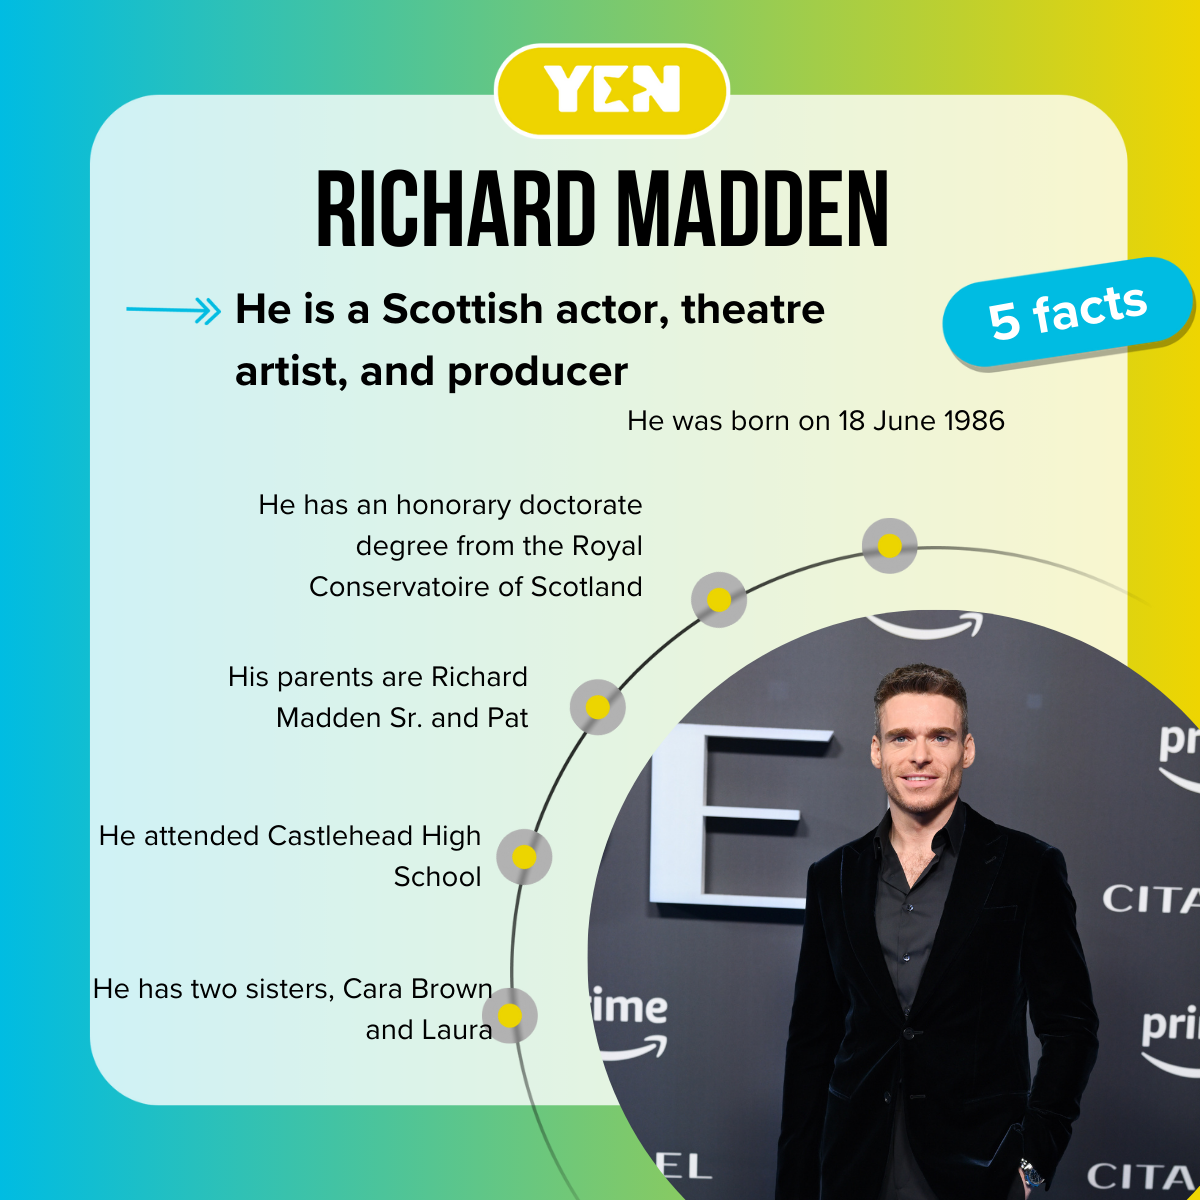 Facts about Richard Madden